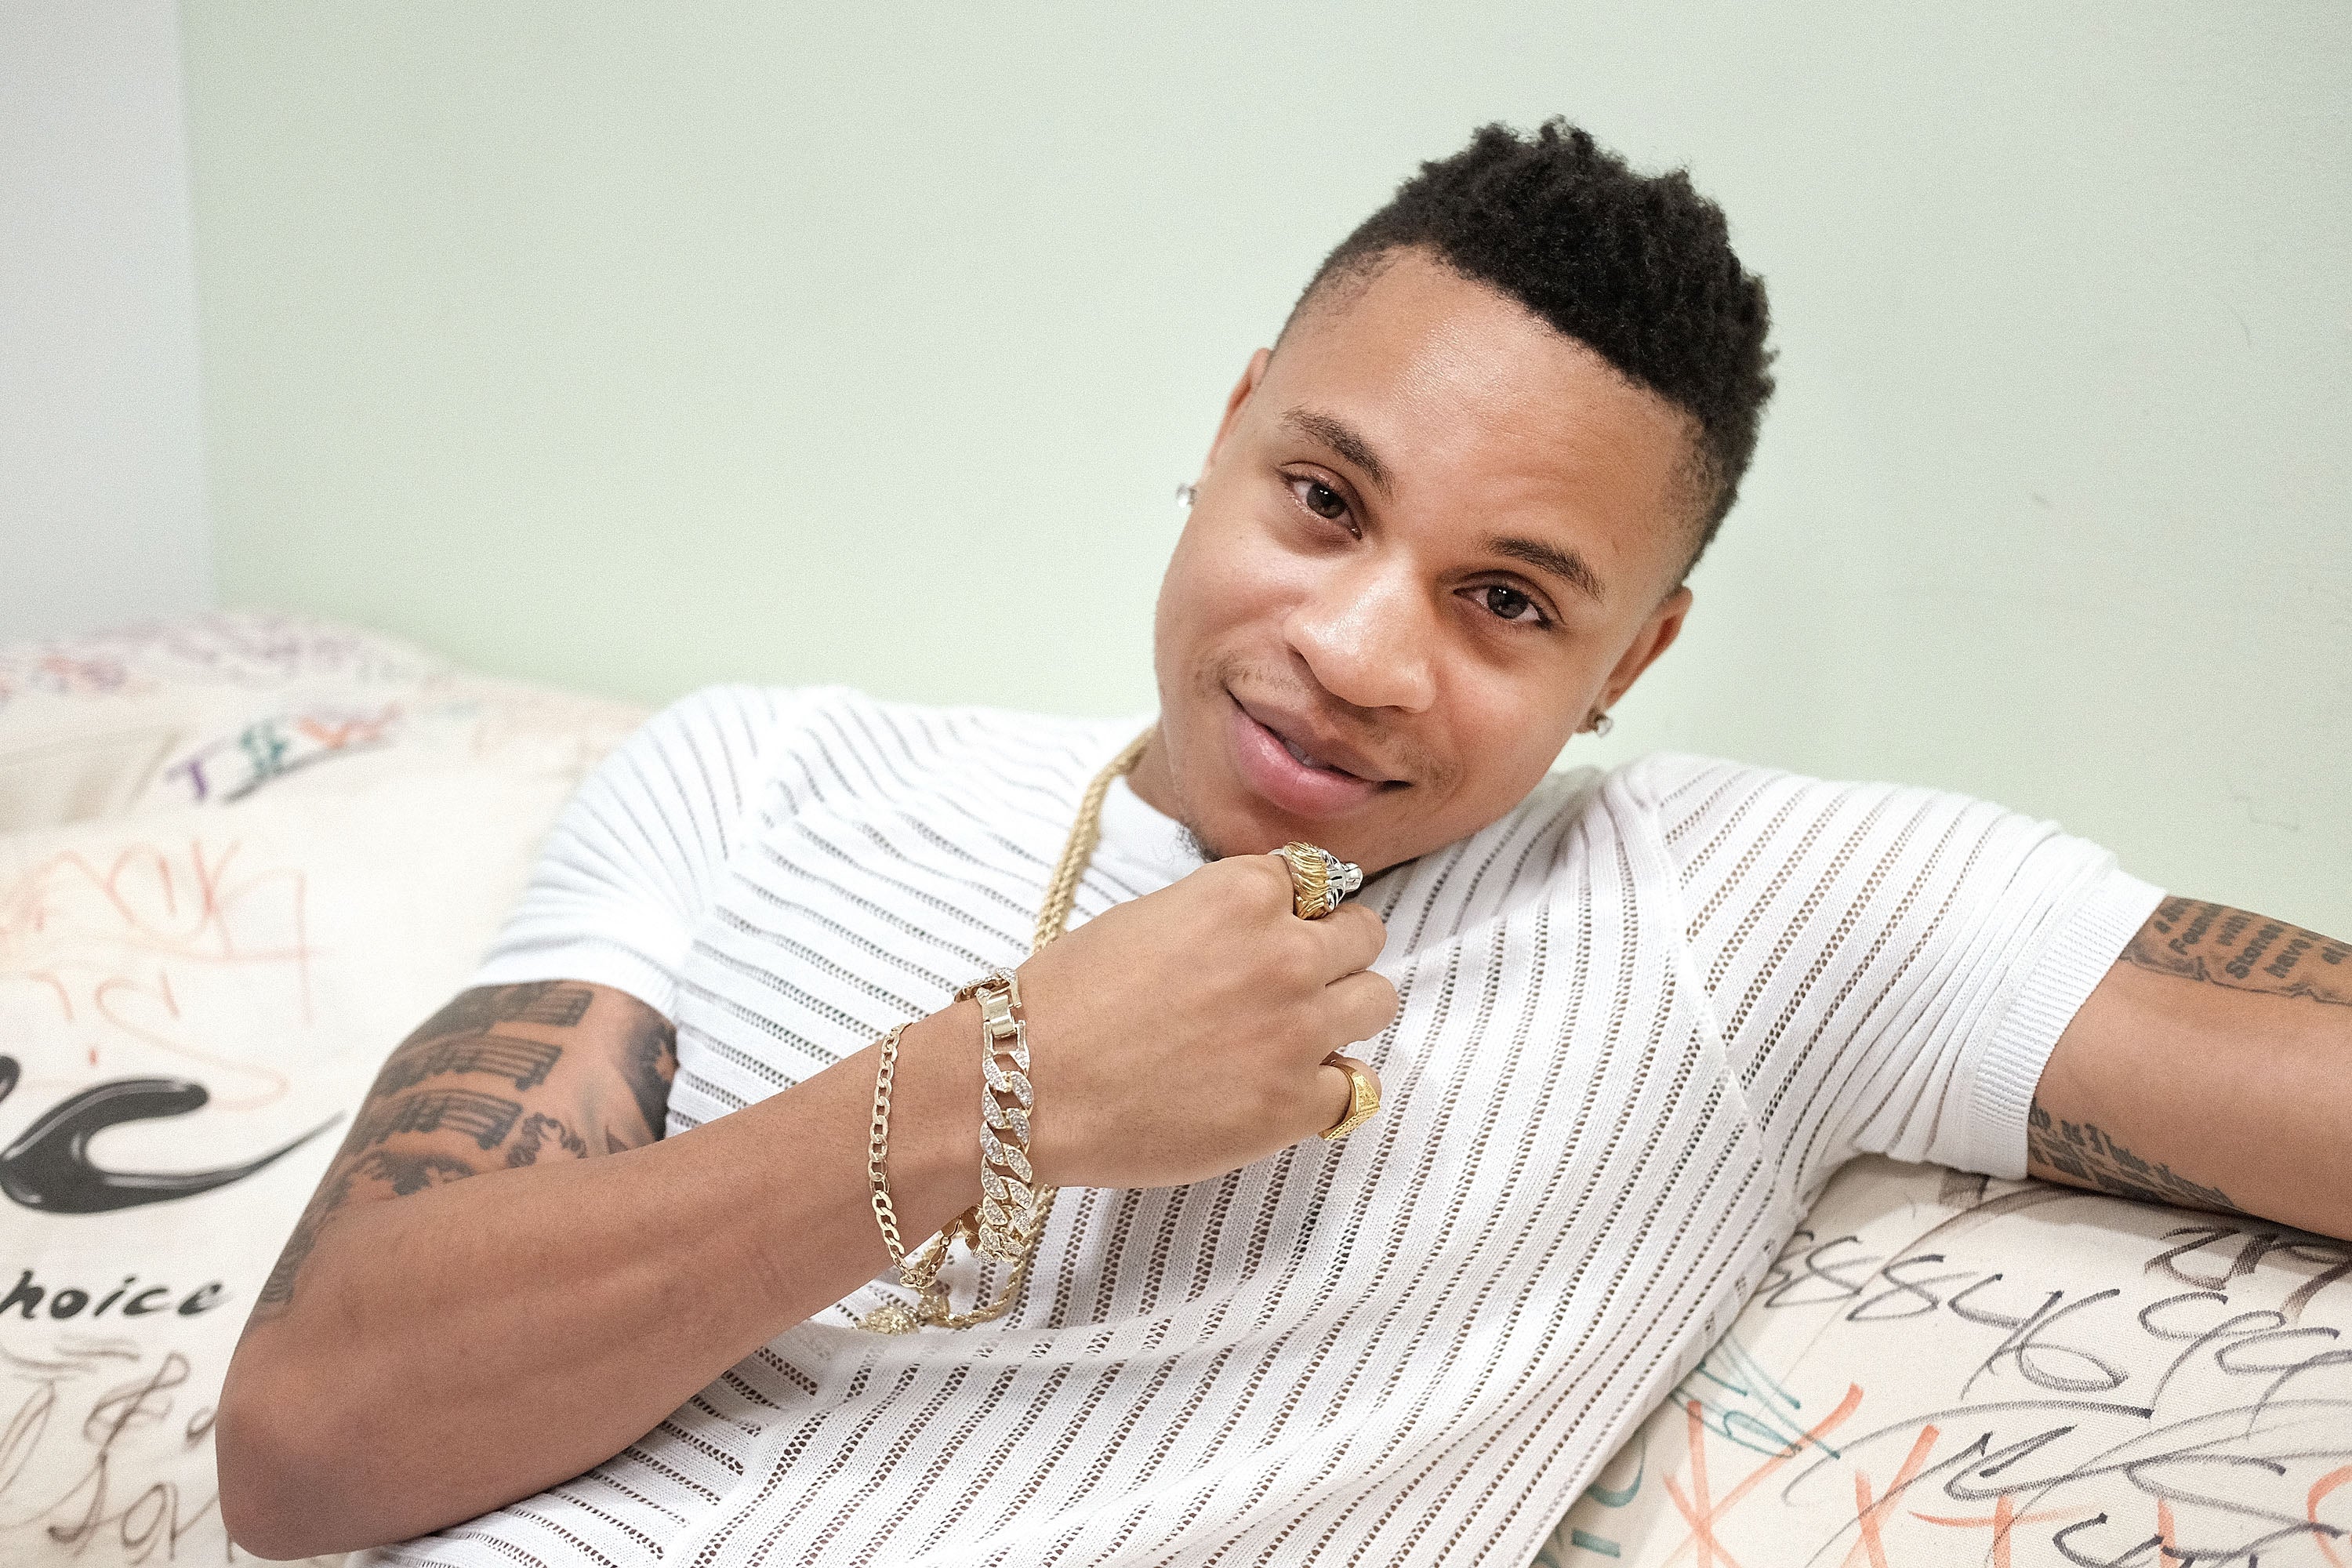 'Power' Star Rotimi May Play A Messy Criminal Onscreen, But This Video Proves He's Smooth AF
